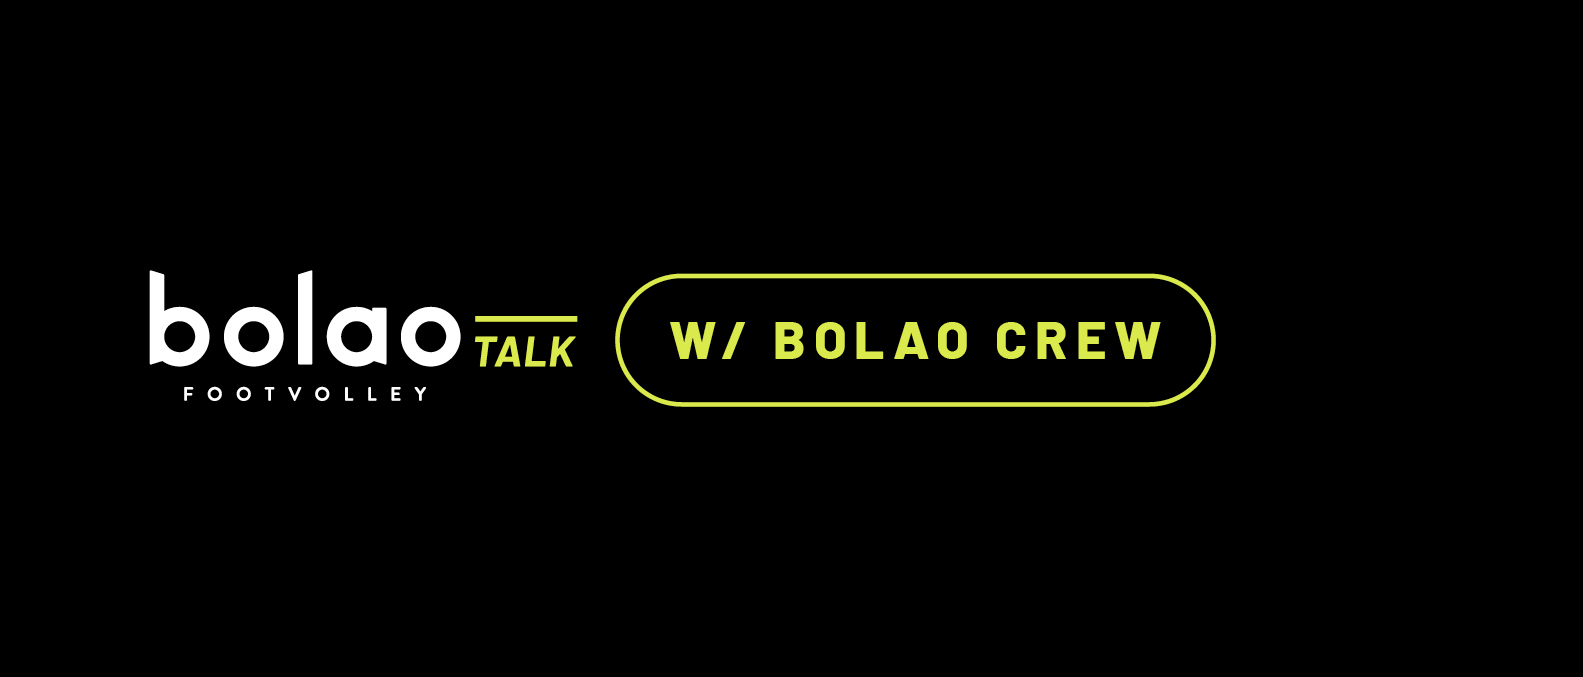 The first bolao Talk of the season